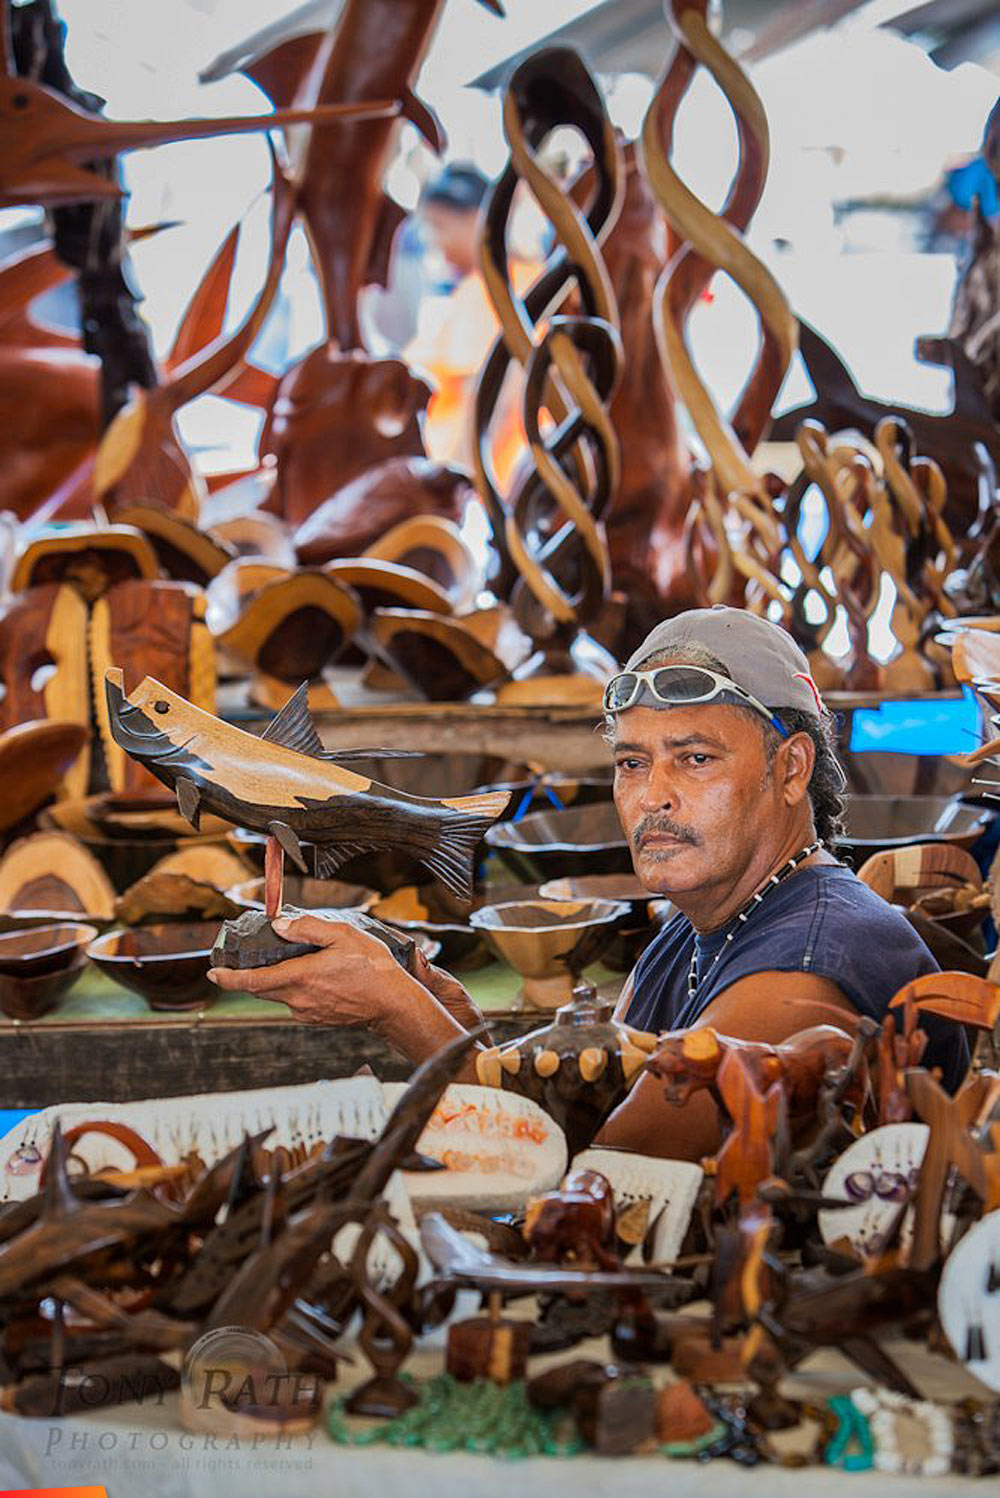 A Placencia sculptor, lots of wood carvings on display